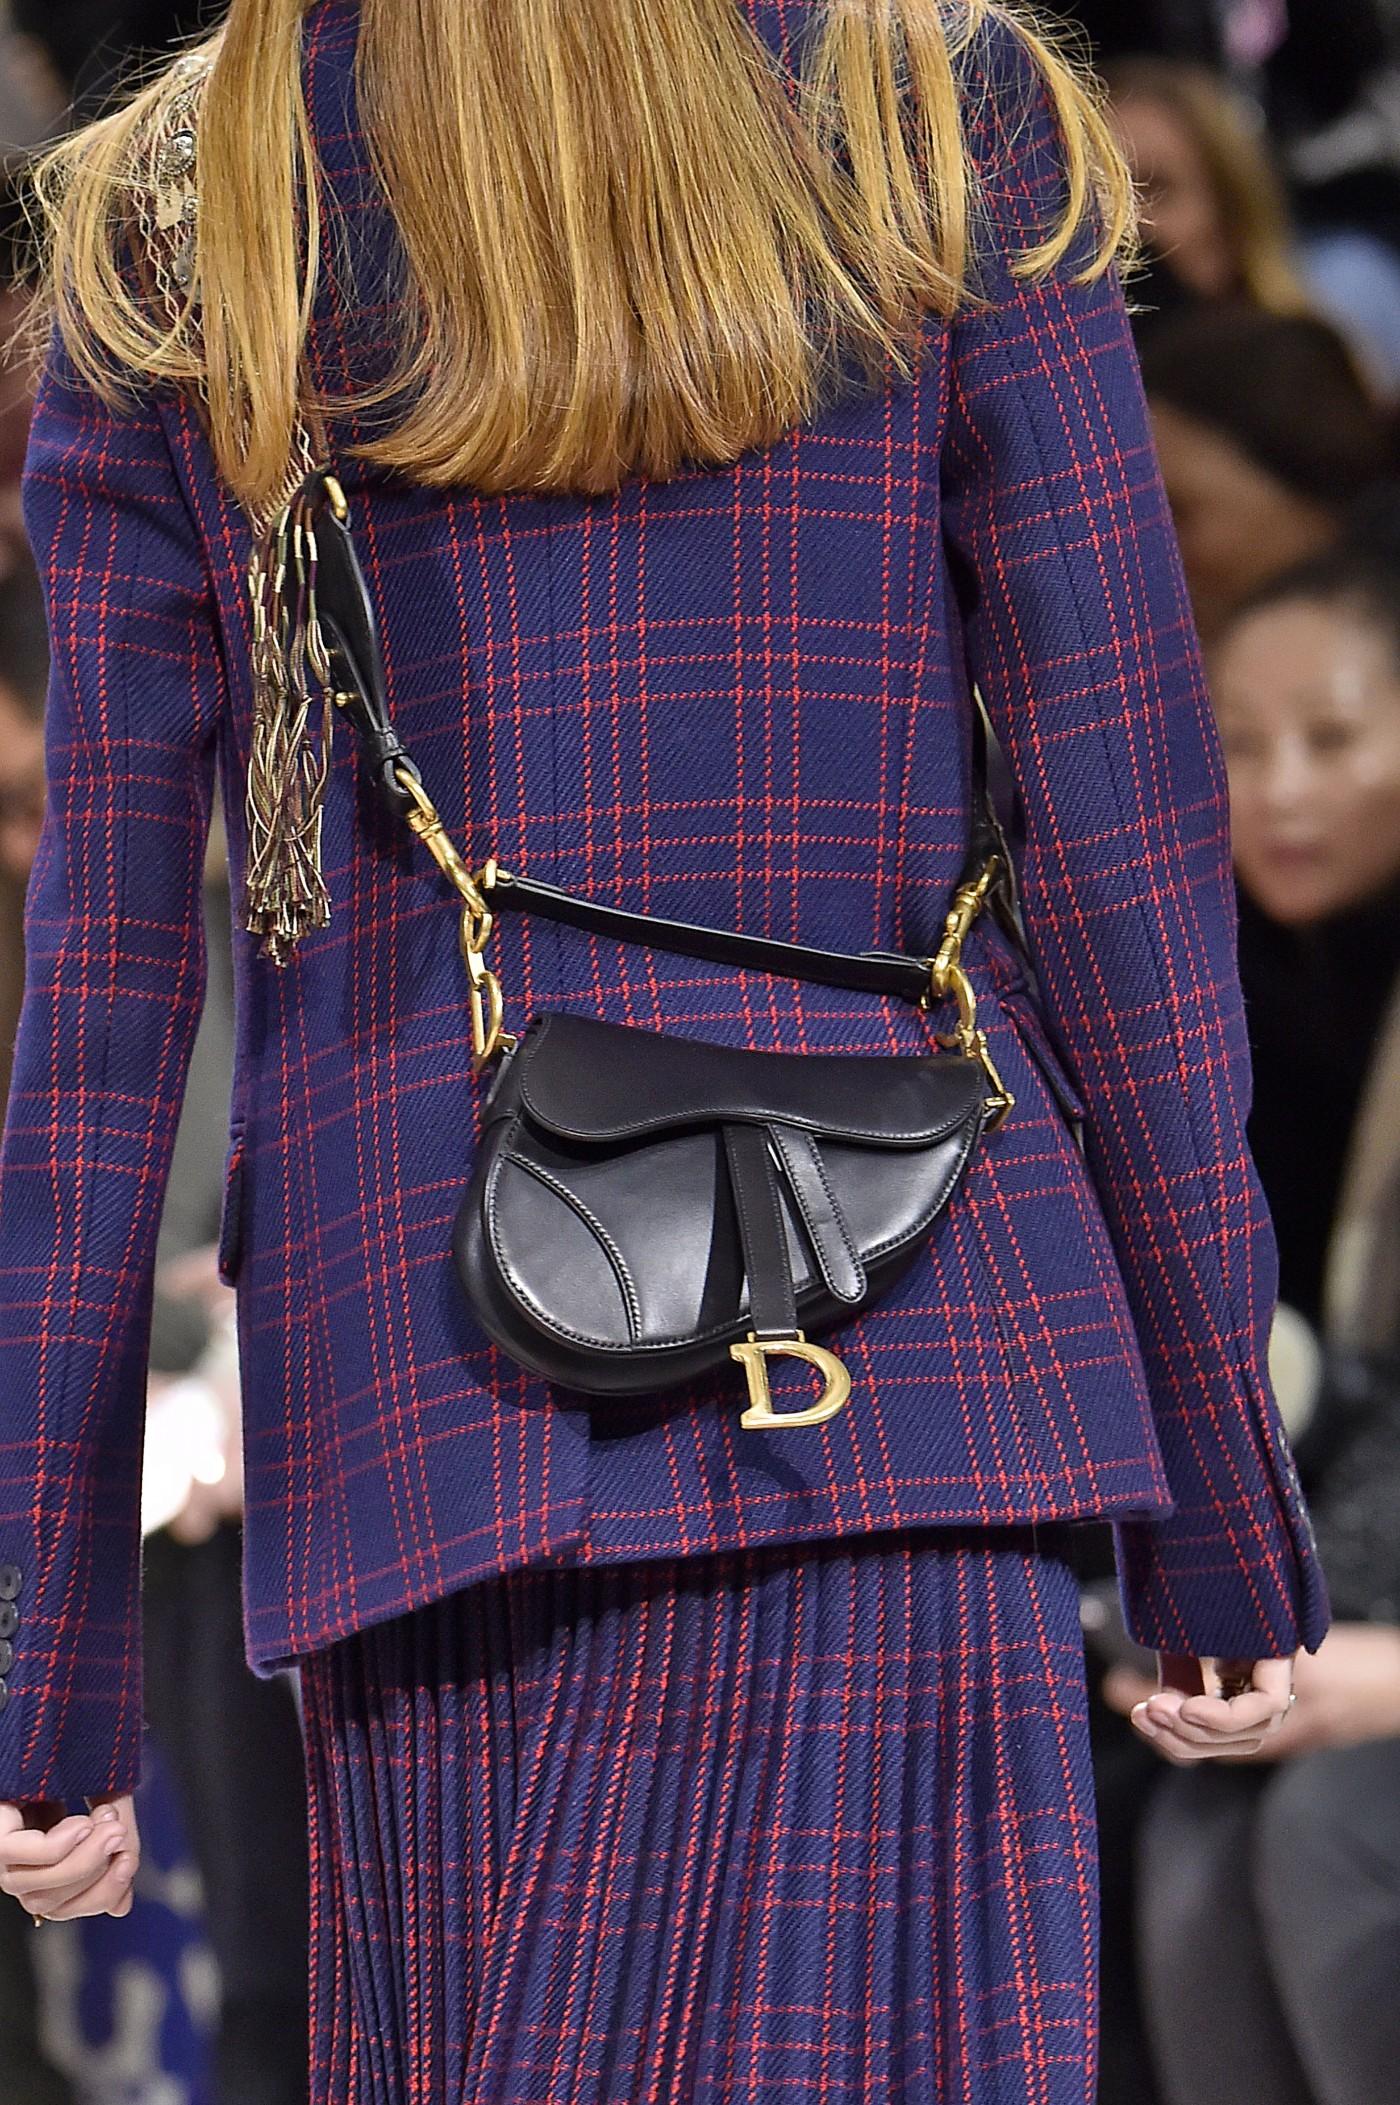 The Dior Saddle Bag Is Back  Fashion, Street style bags, Dior